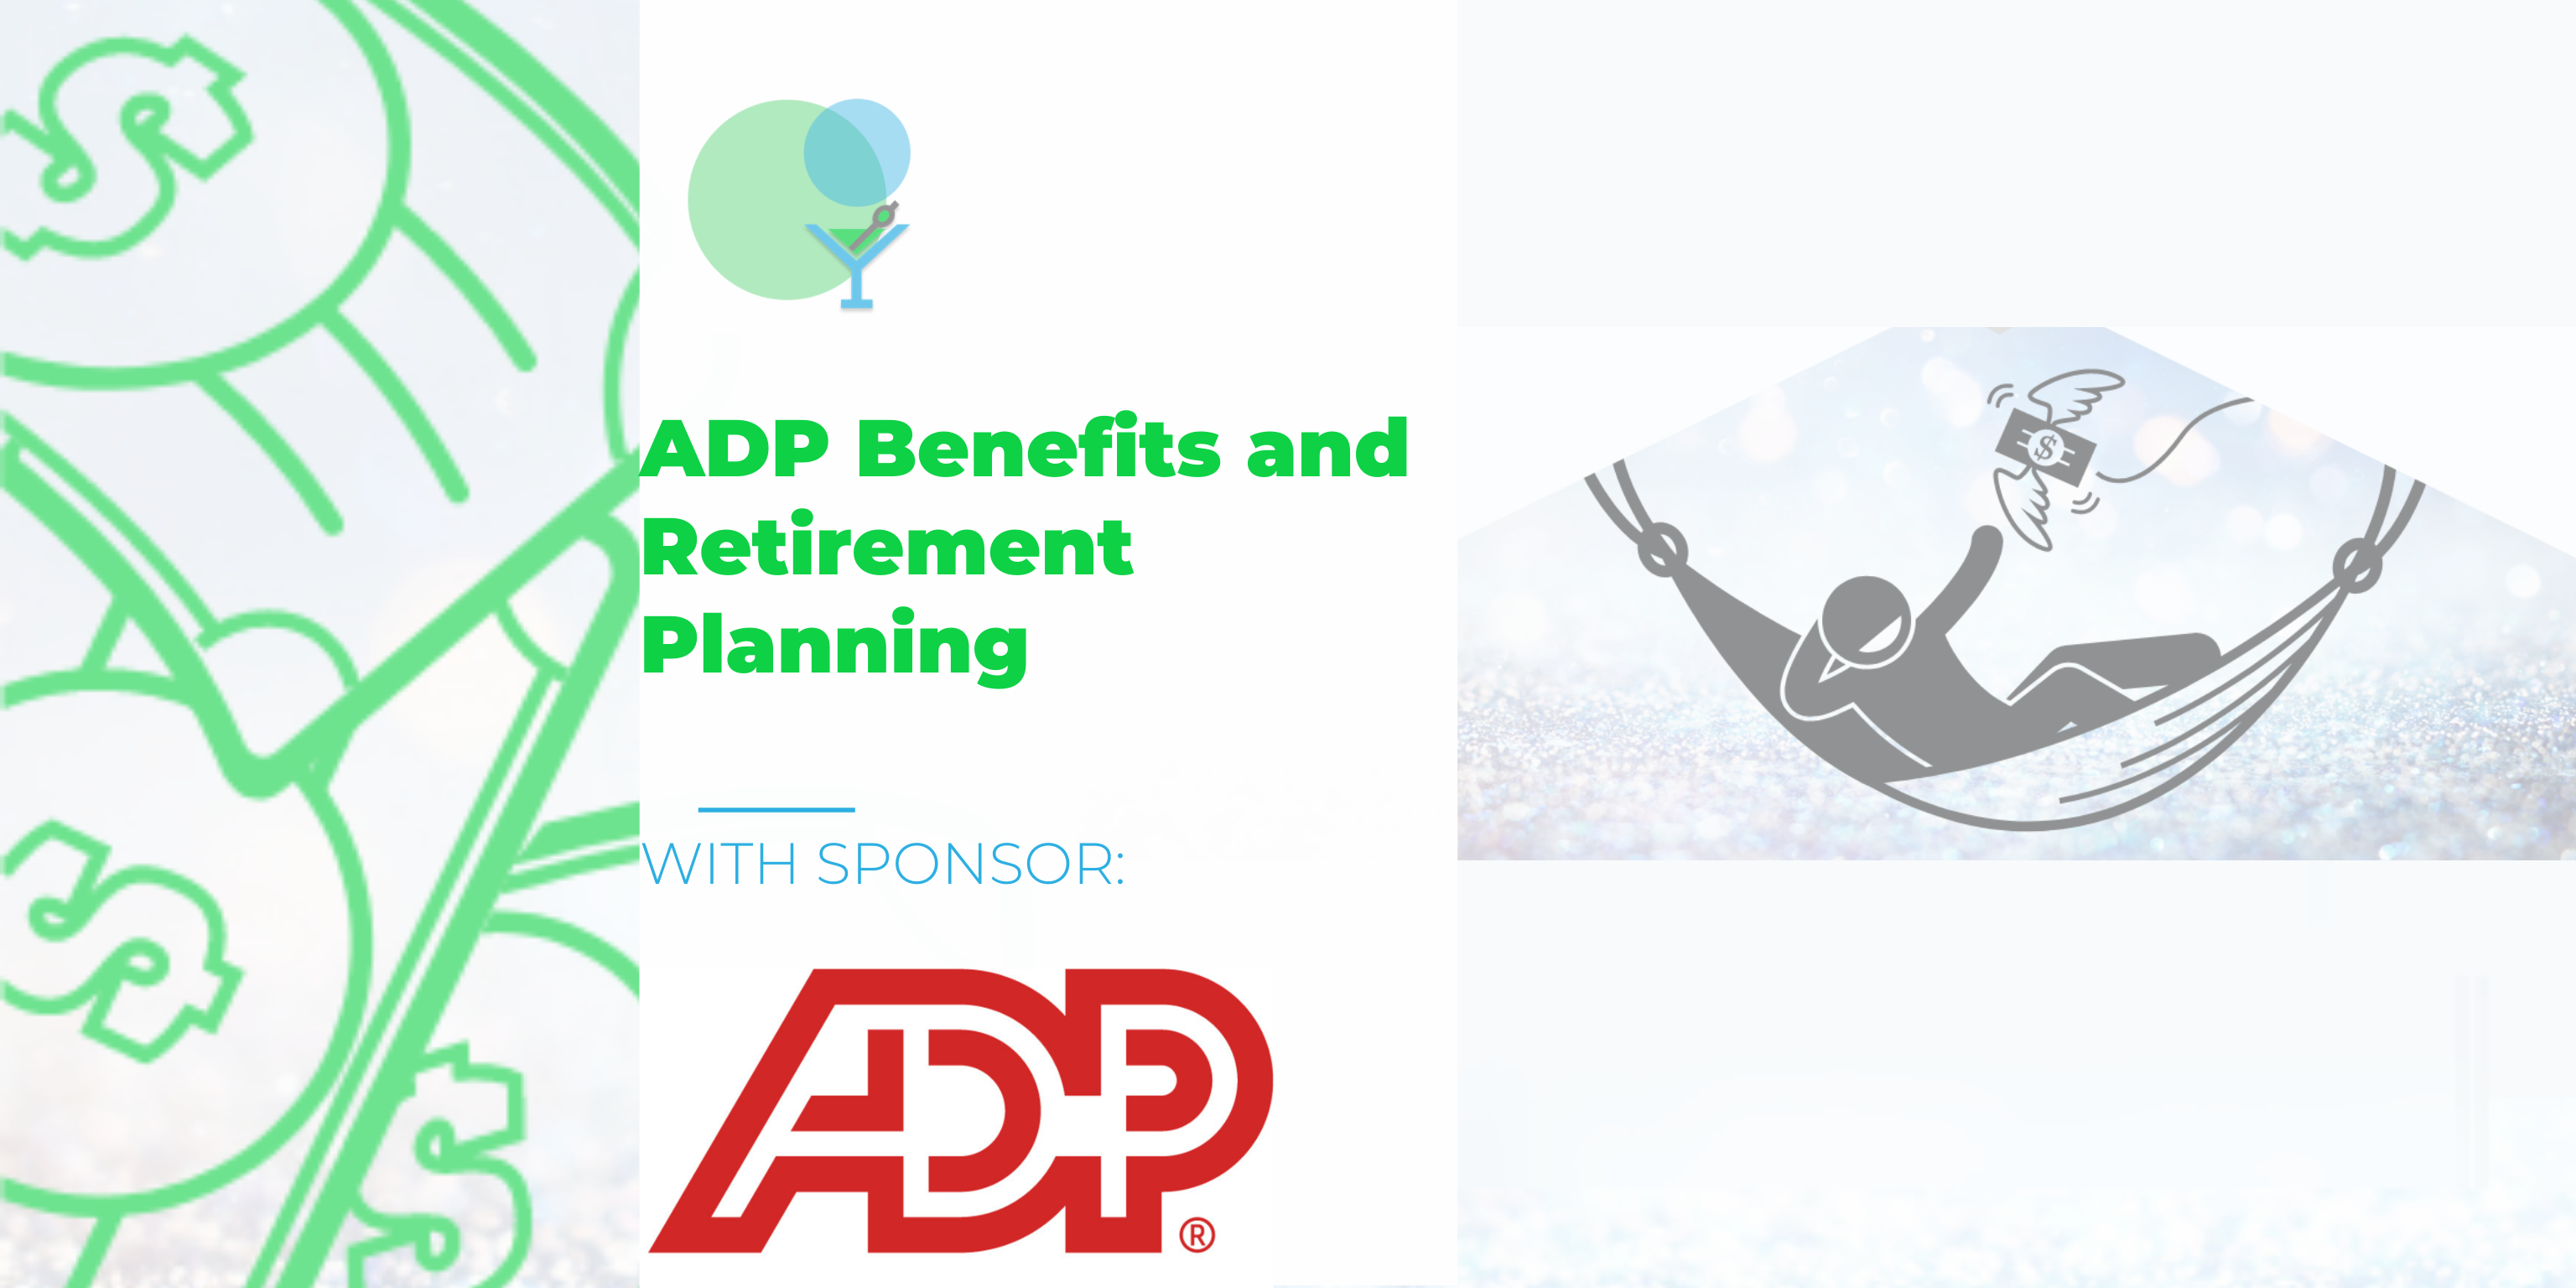 Year-End and ADP Retirement Planning & Benefits